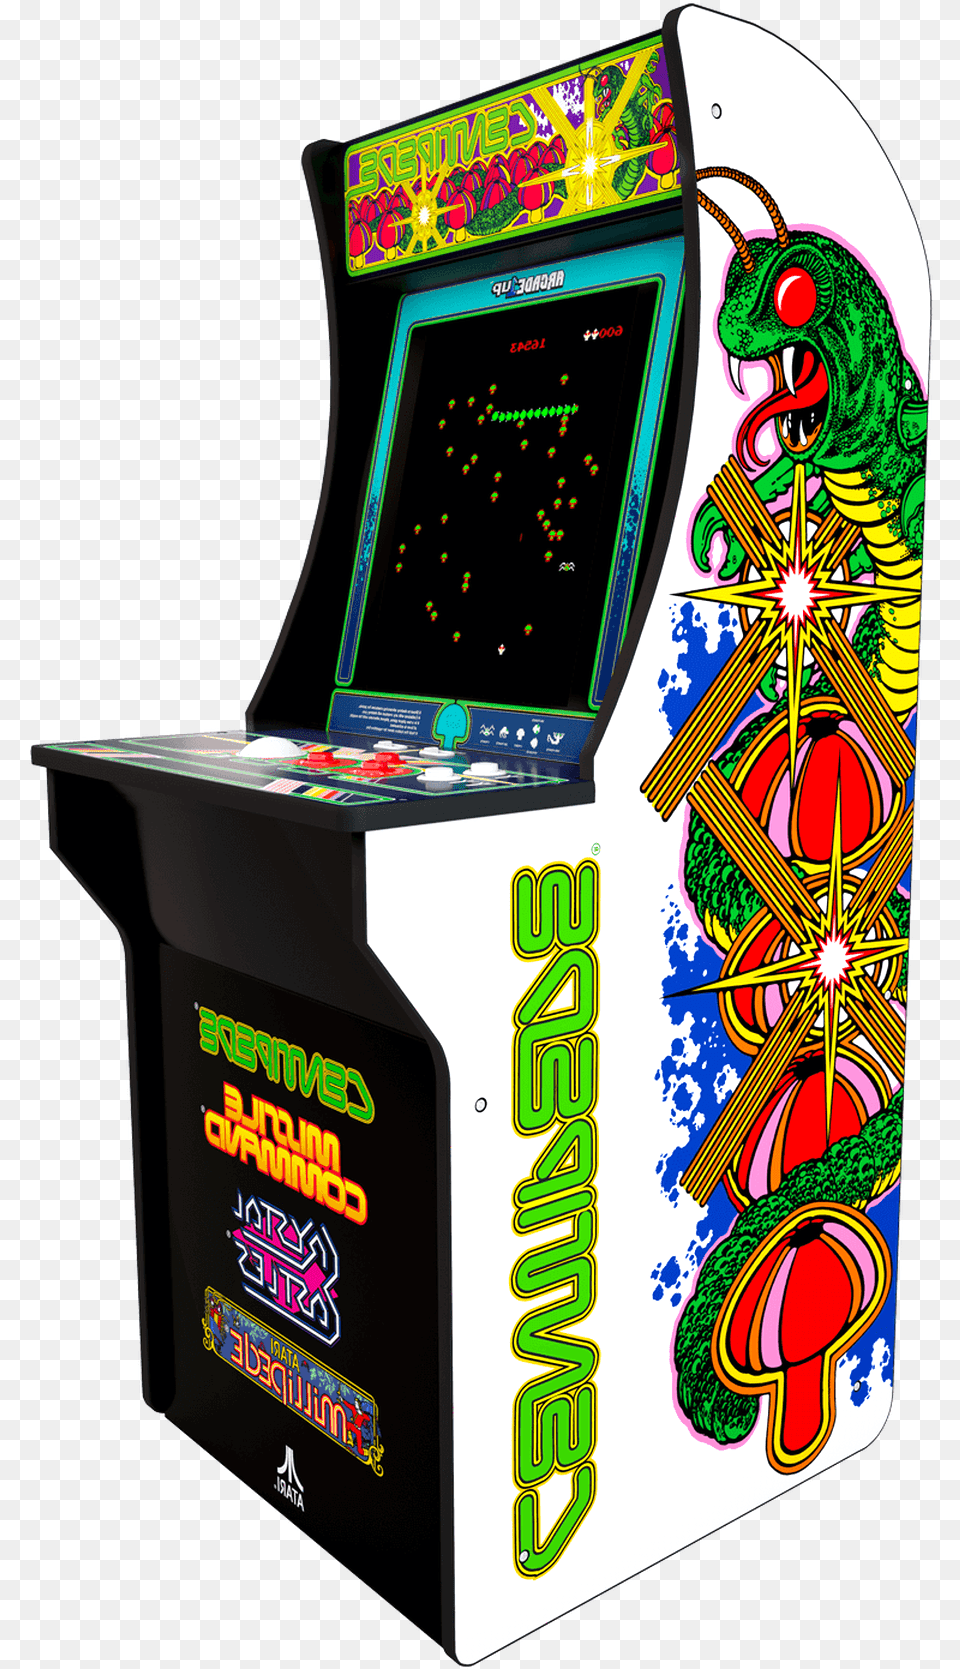 Centipede Arcade For Sale, Arcade Game Machine, Game Free Png Download